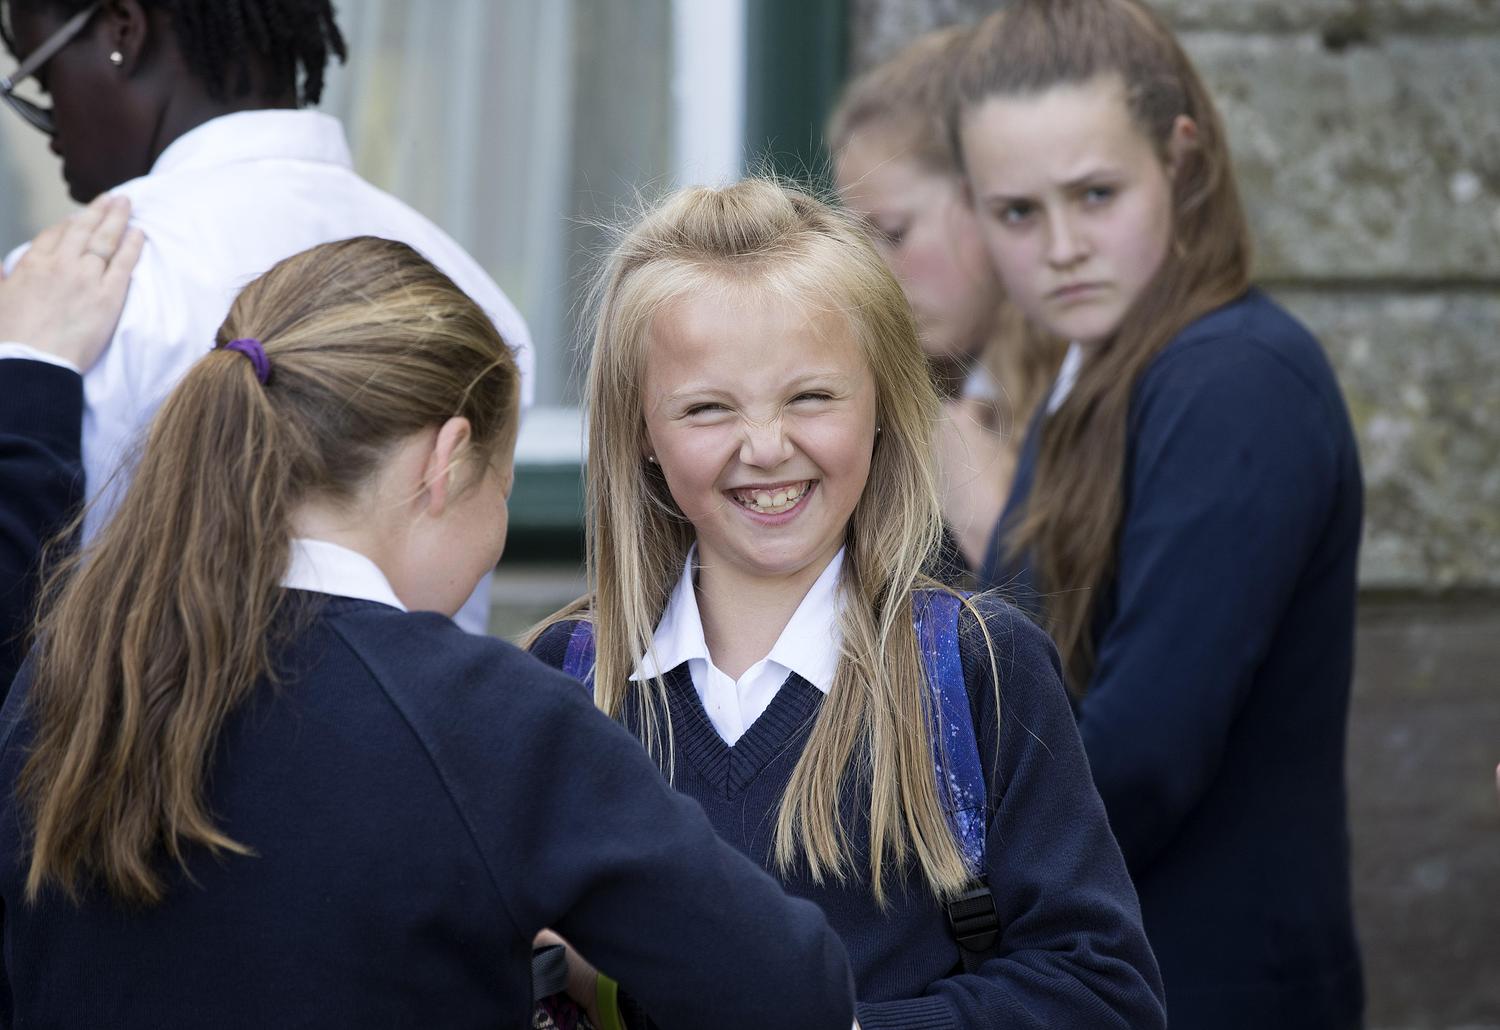 Strathallan School expanding to reach new students at home and abroad